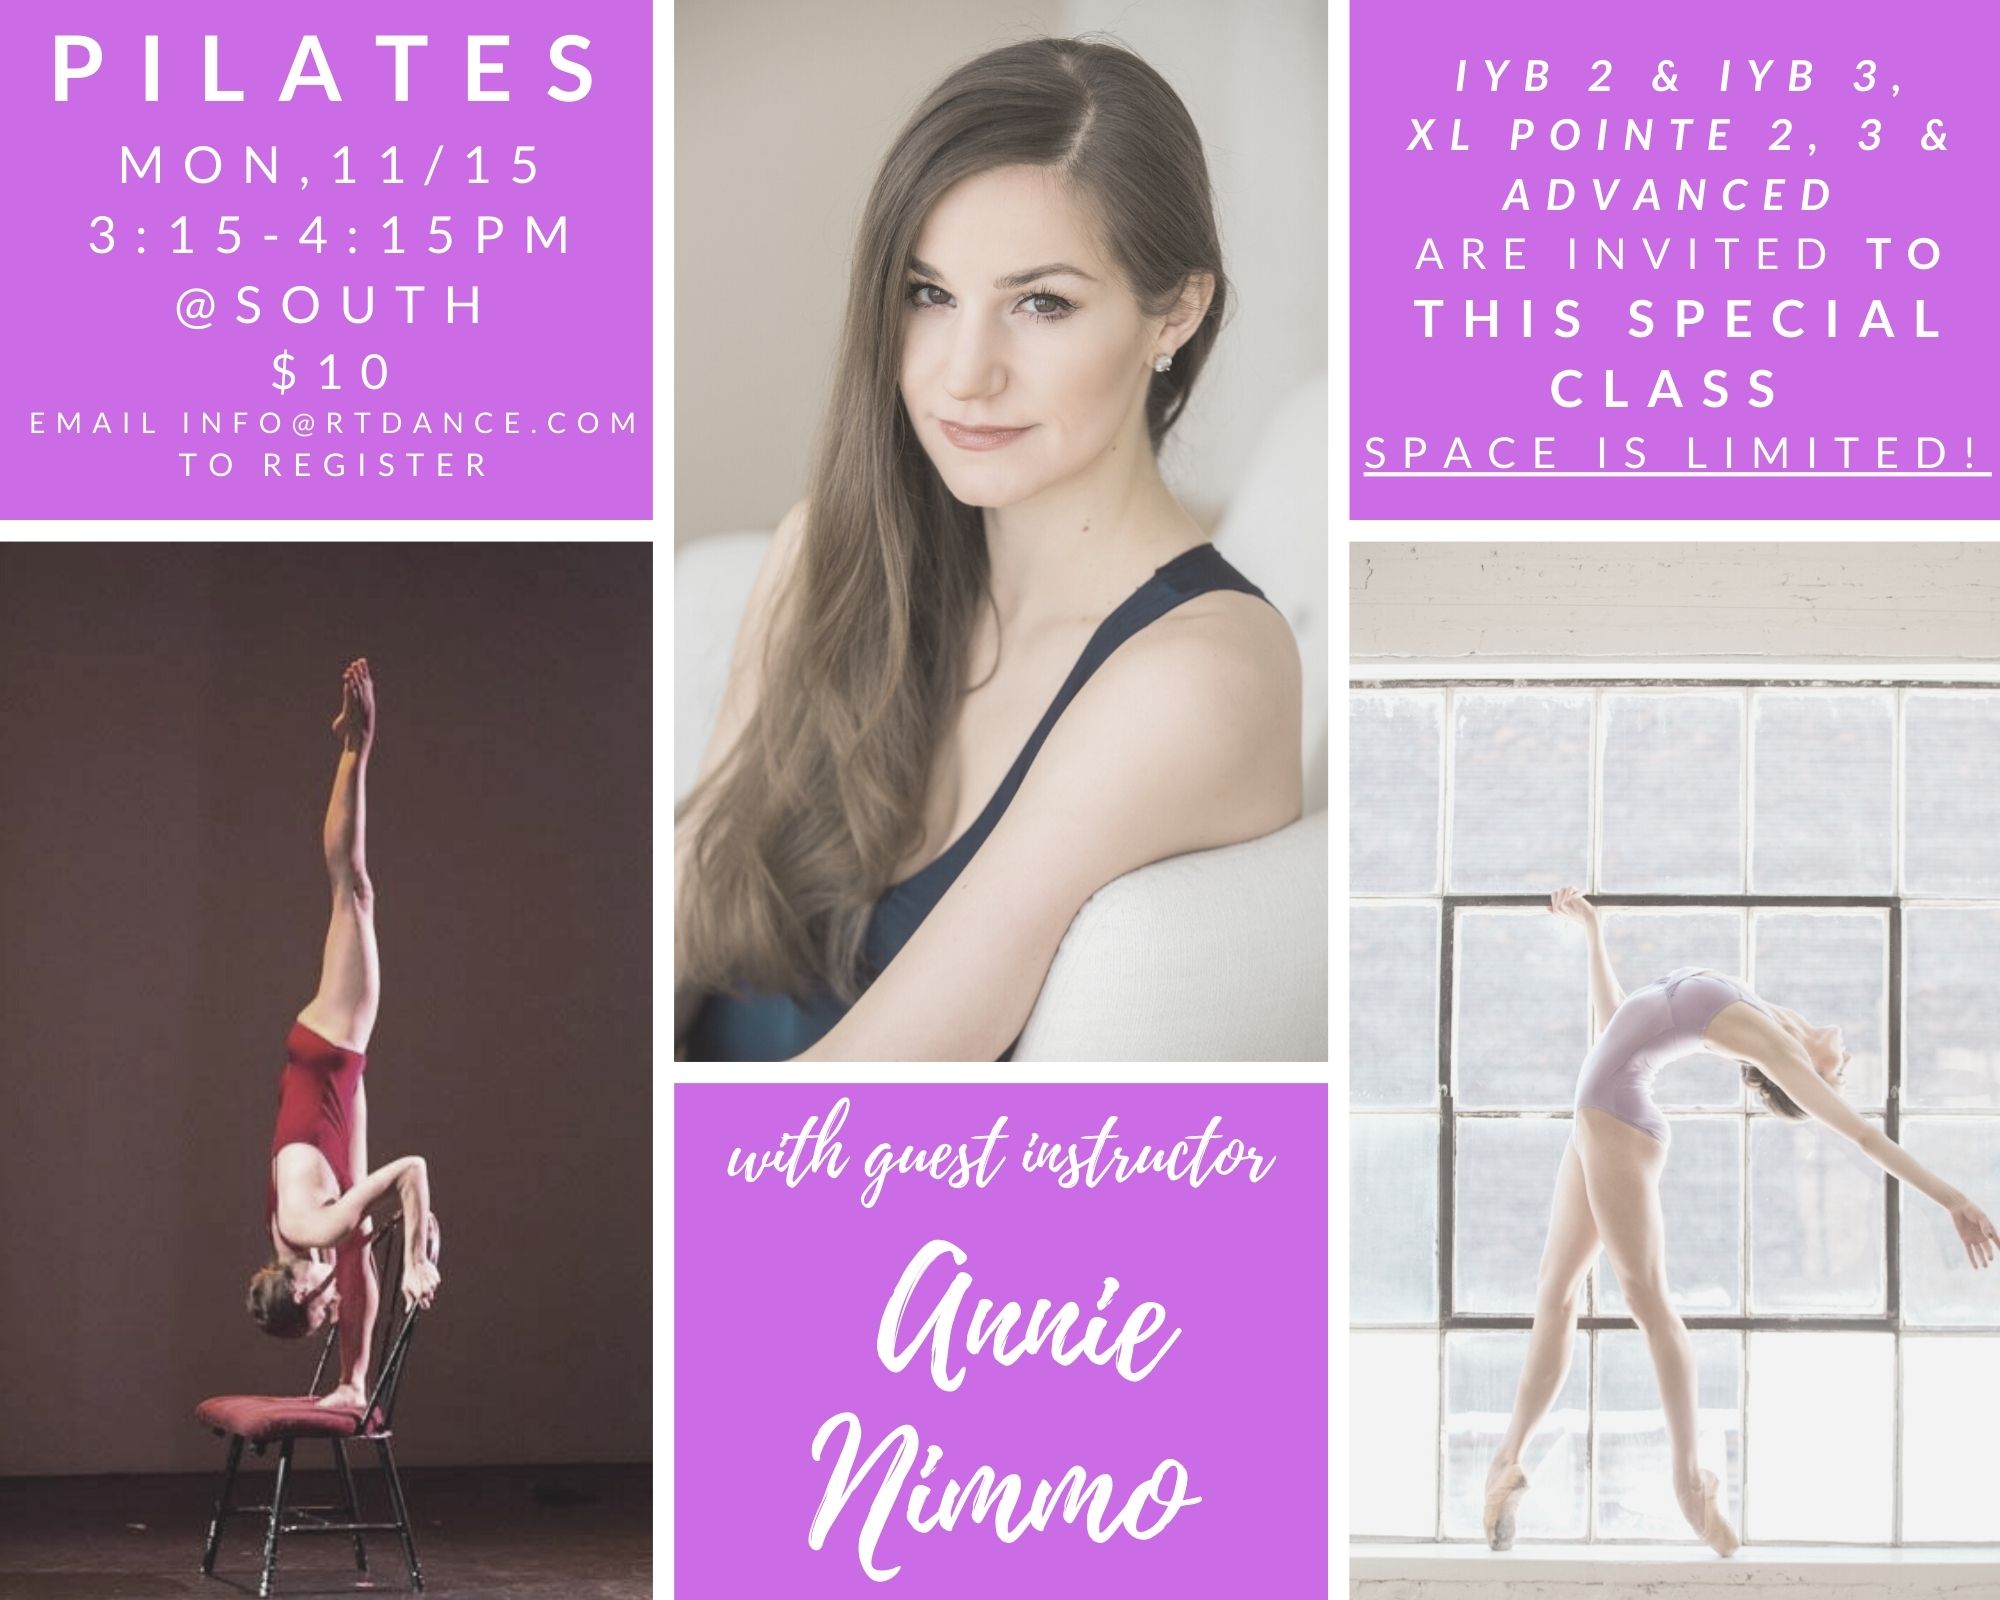 Flyer - Pilates with guest instructor annie nimmo